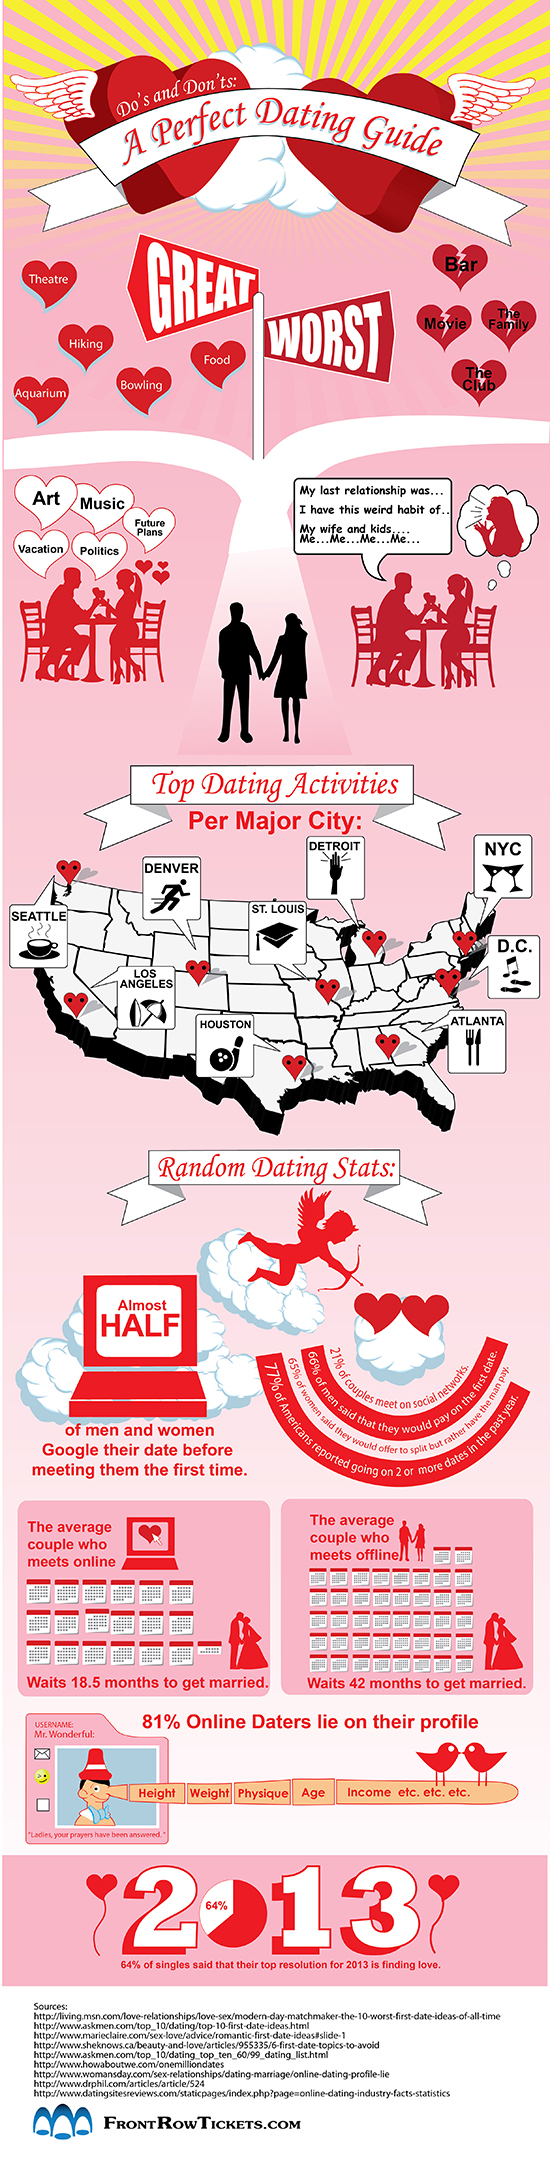 The Skinny on Dating- Top Dating Activities In Major Cities